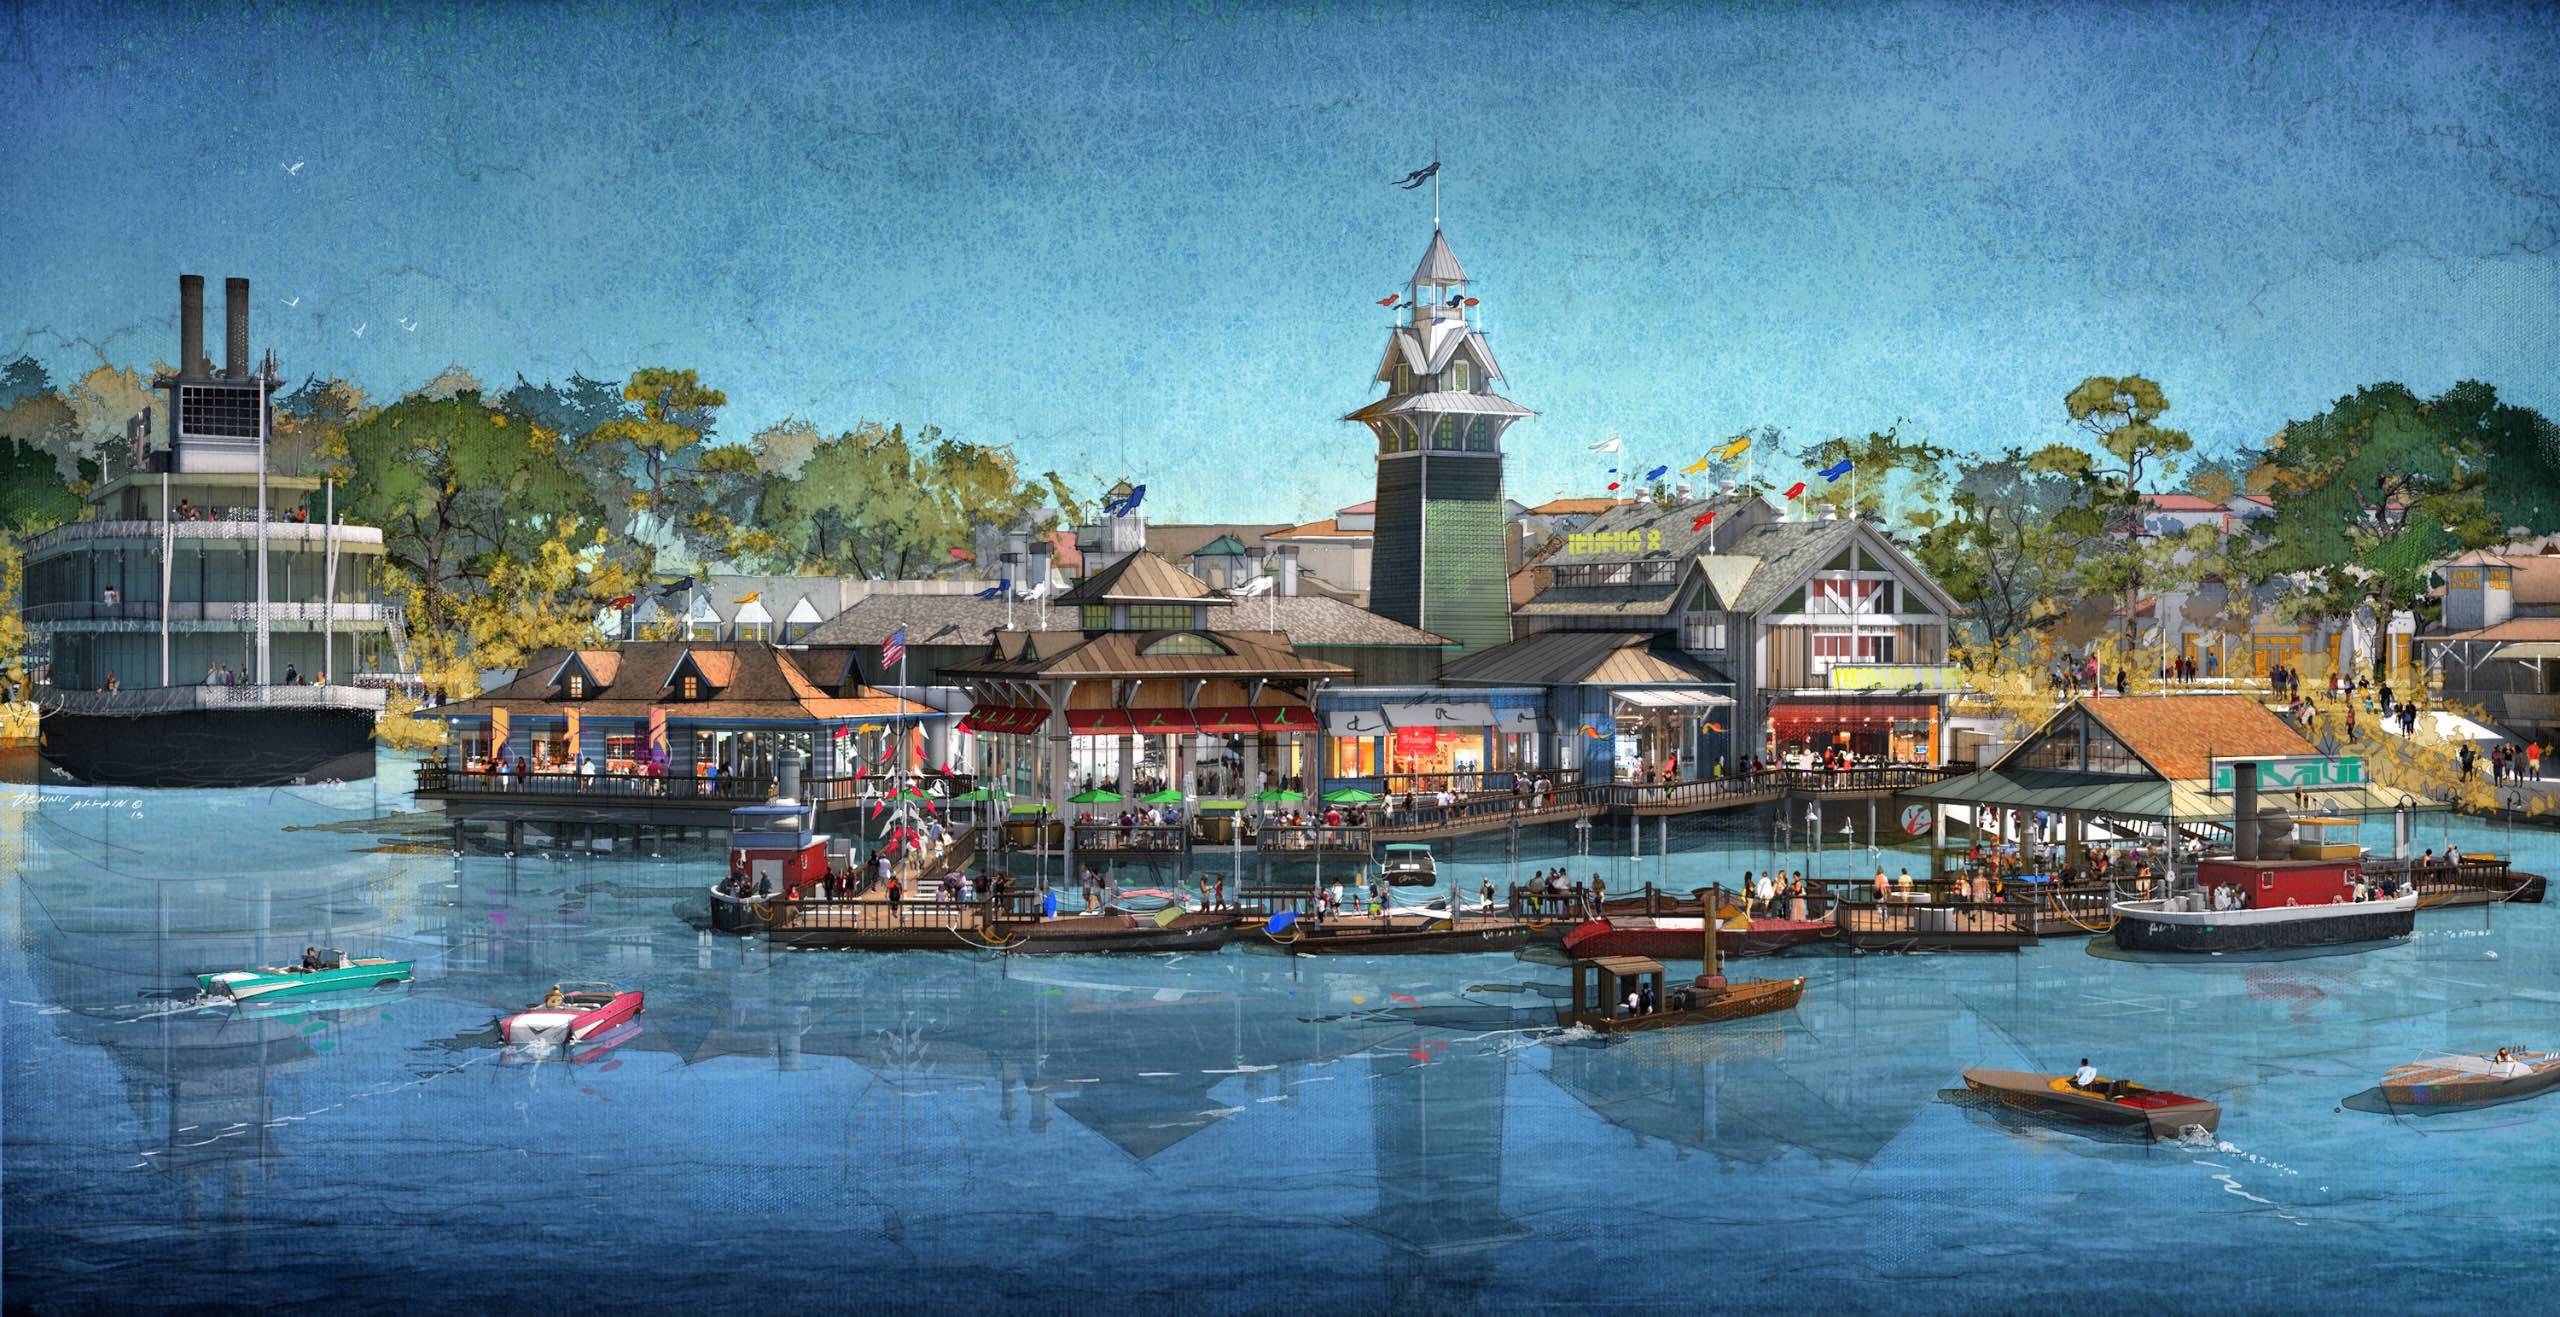 The BOATHOUSE concept art - Water view